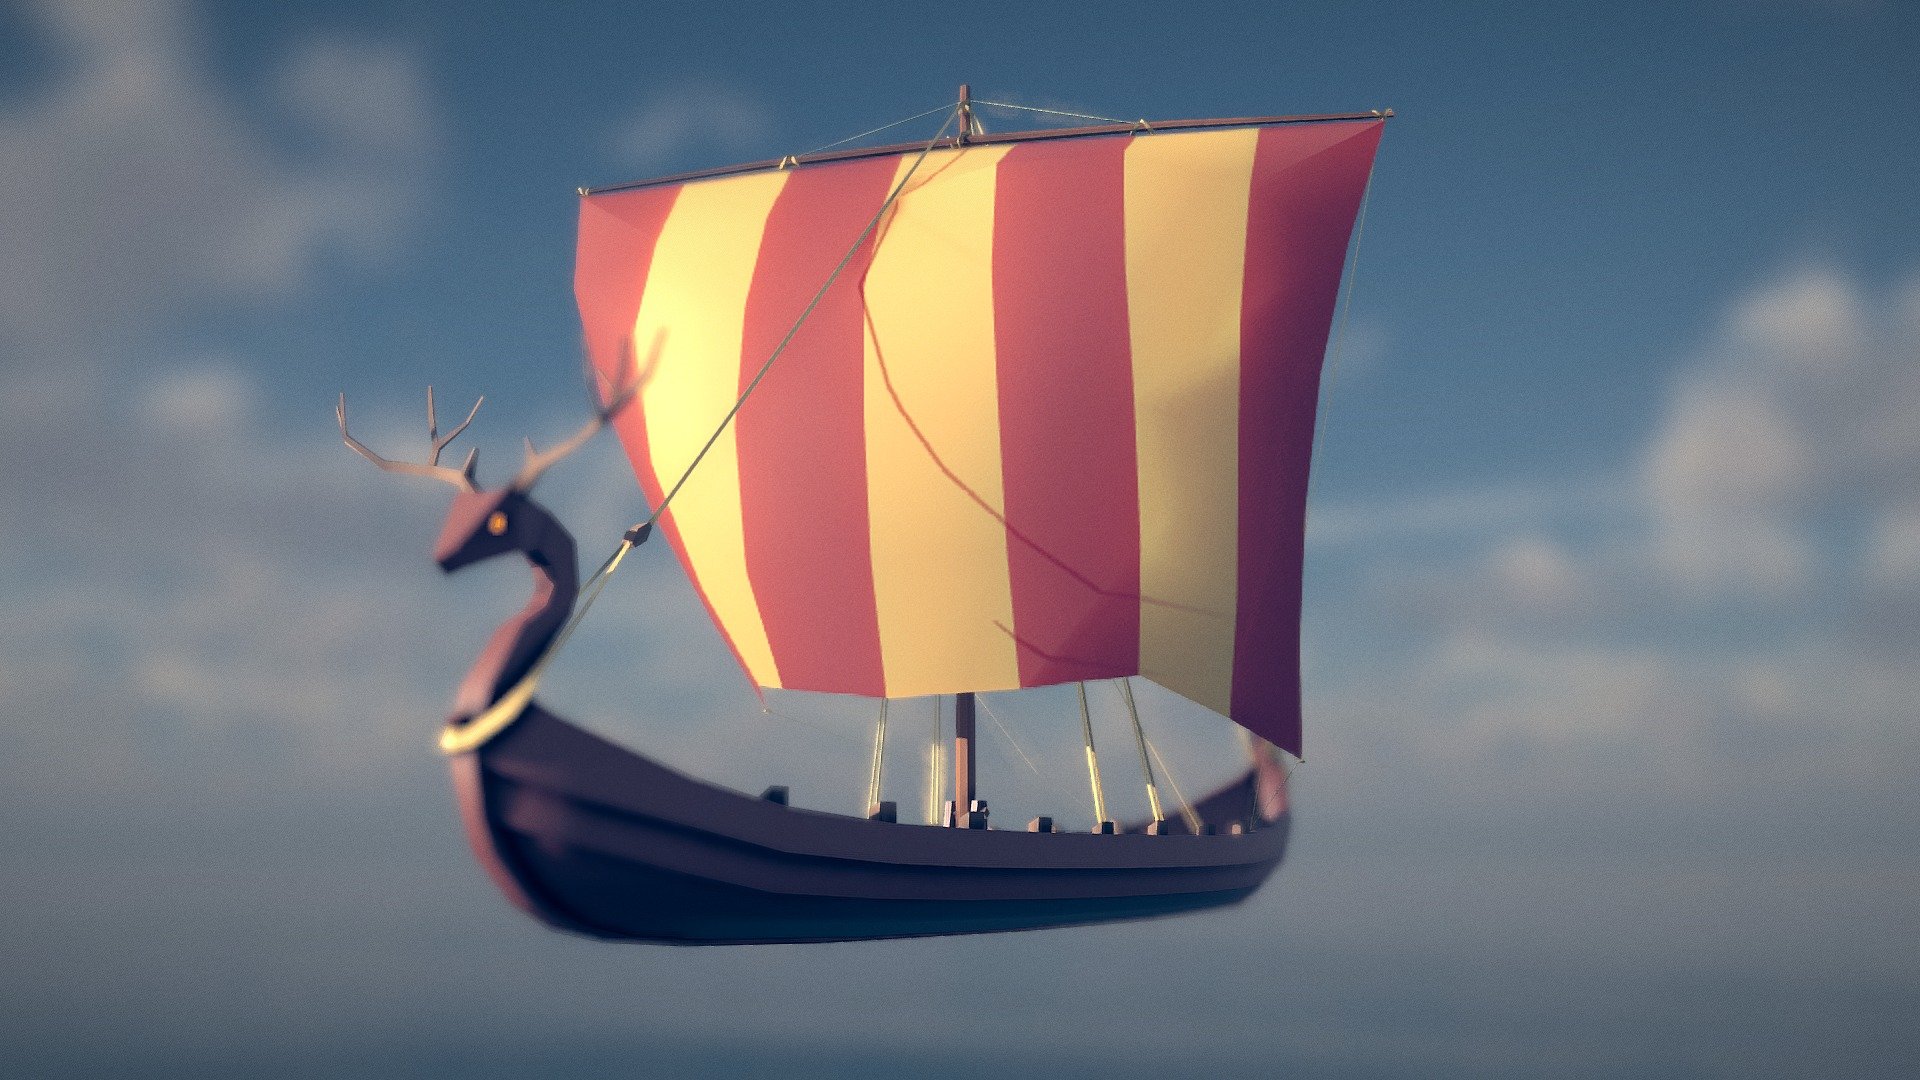 Part of the Medieval Fantasy contest entry Thor and the Midgard Serpet.

Full Diorama Model

Forum Thread With Info - Viking Longship - Download Free 3D model by Mr. The Rich (@MrTheRich) 3d model